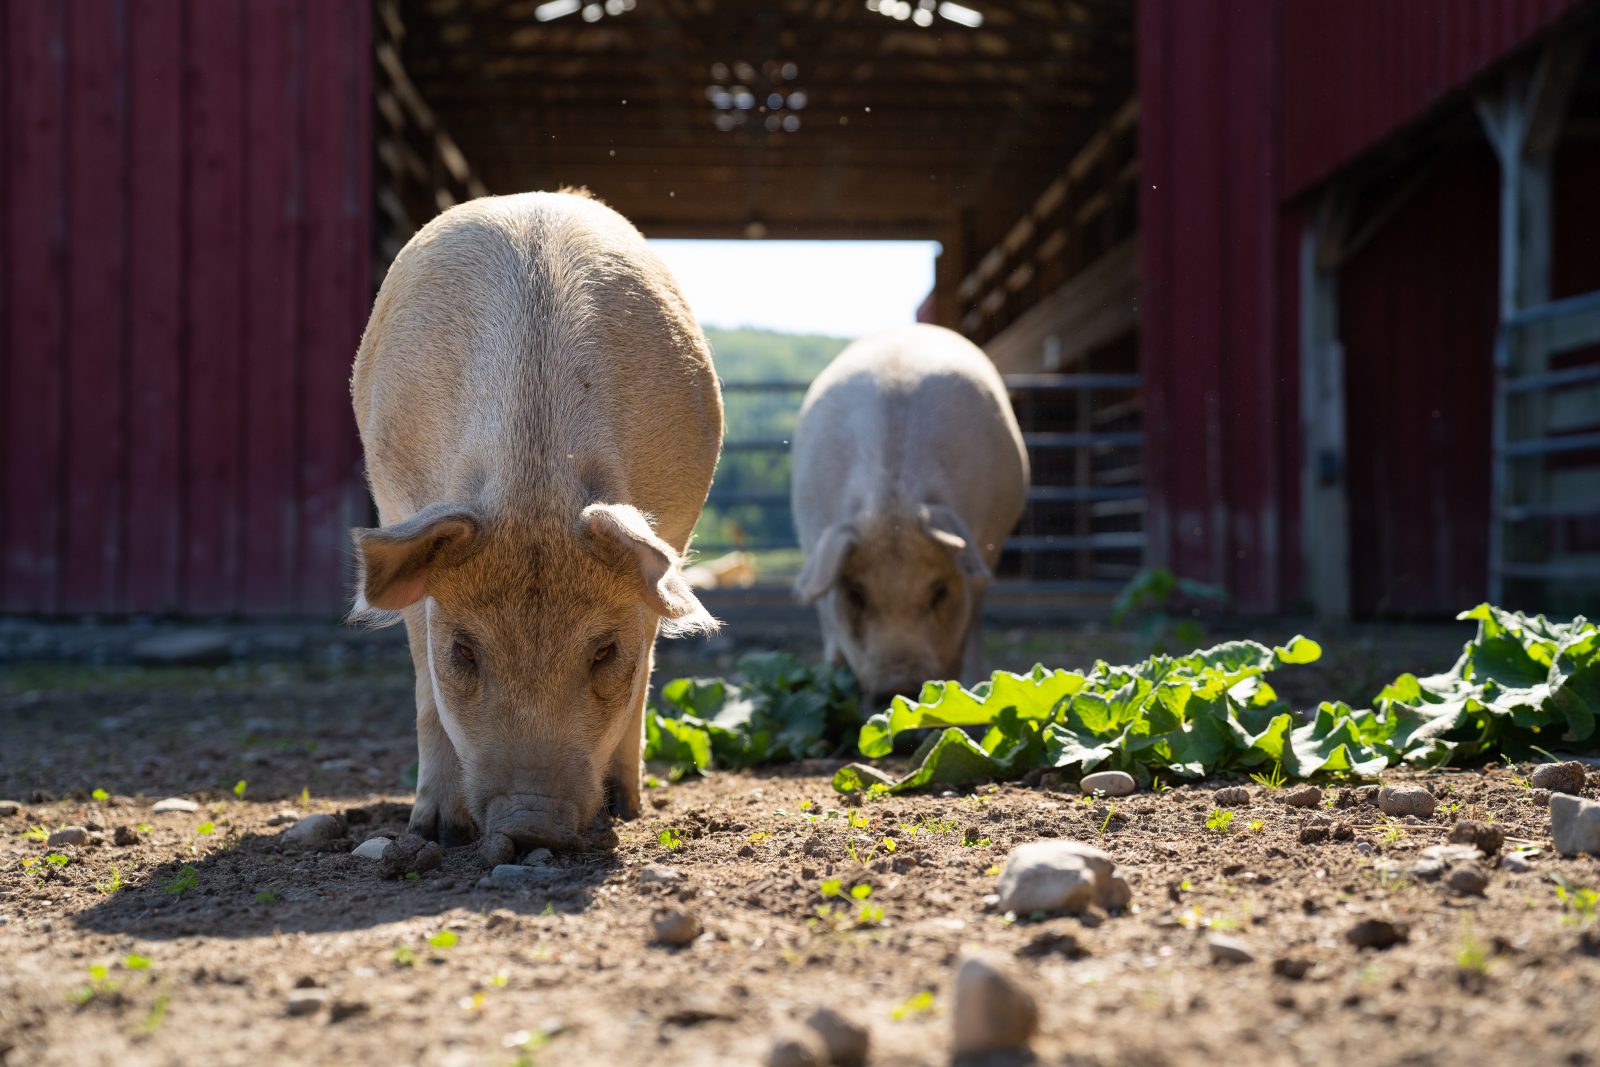 Robbie and Lizzie pigs at Farm Sanctuary